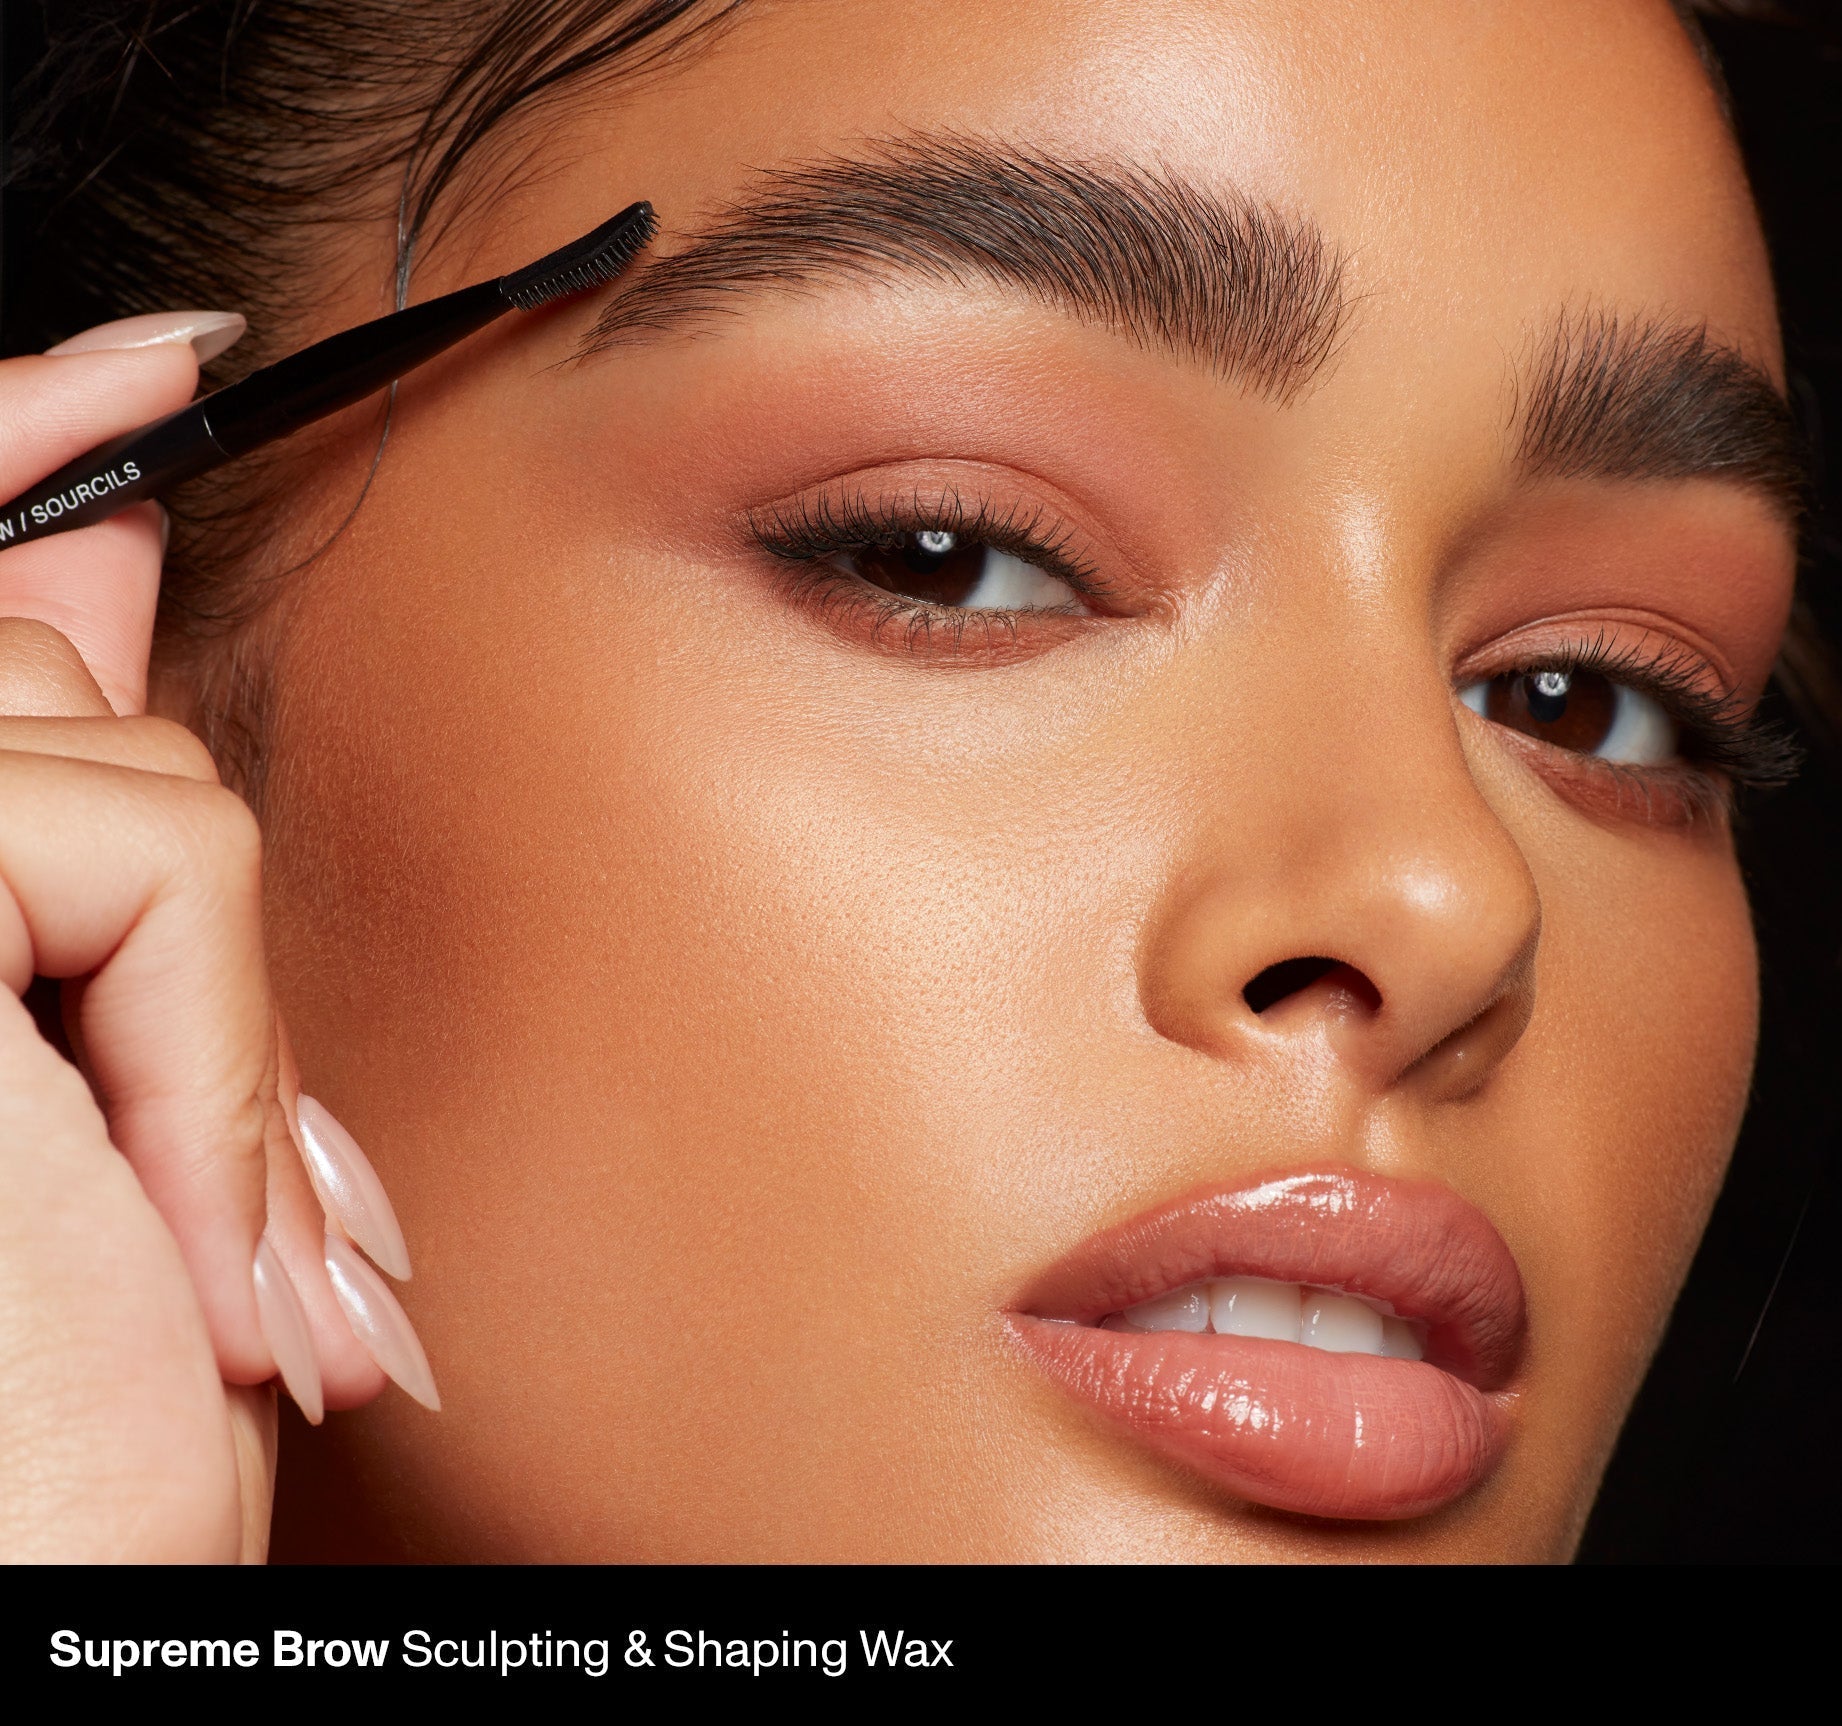 Supreme Brow Sculpting And Shaping Wax - Biscotti - Image 9